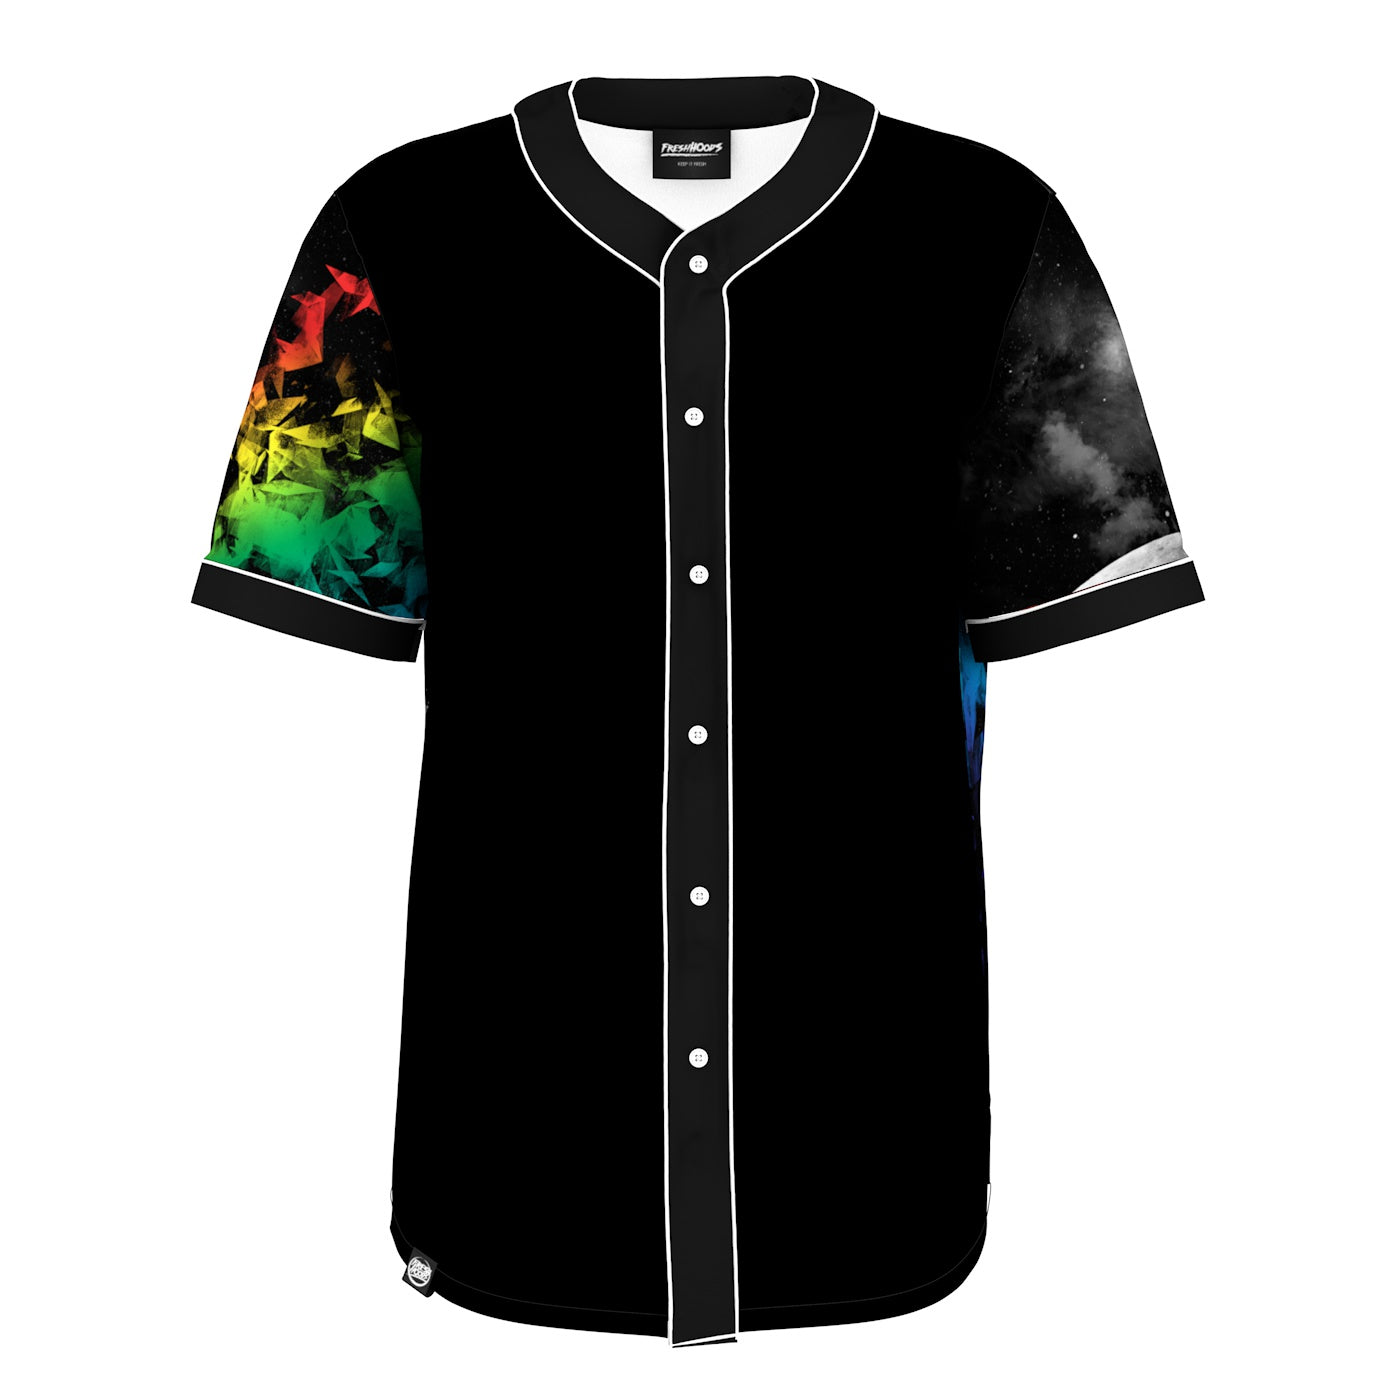 Prism Jersey